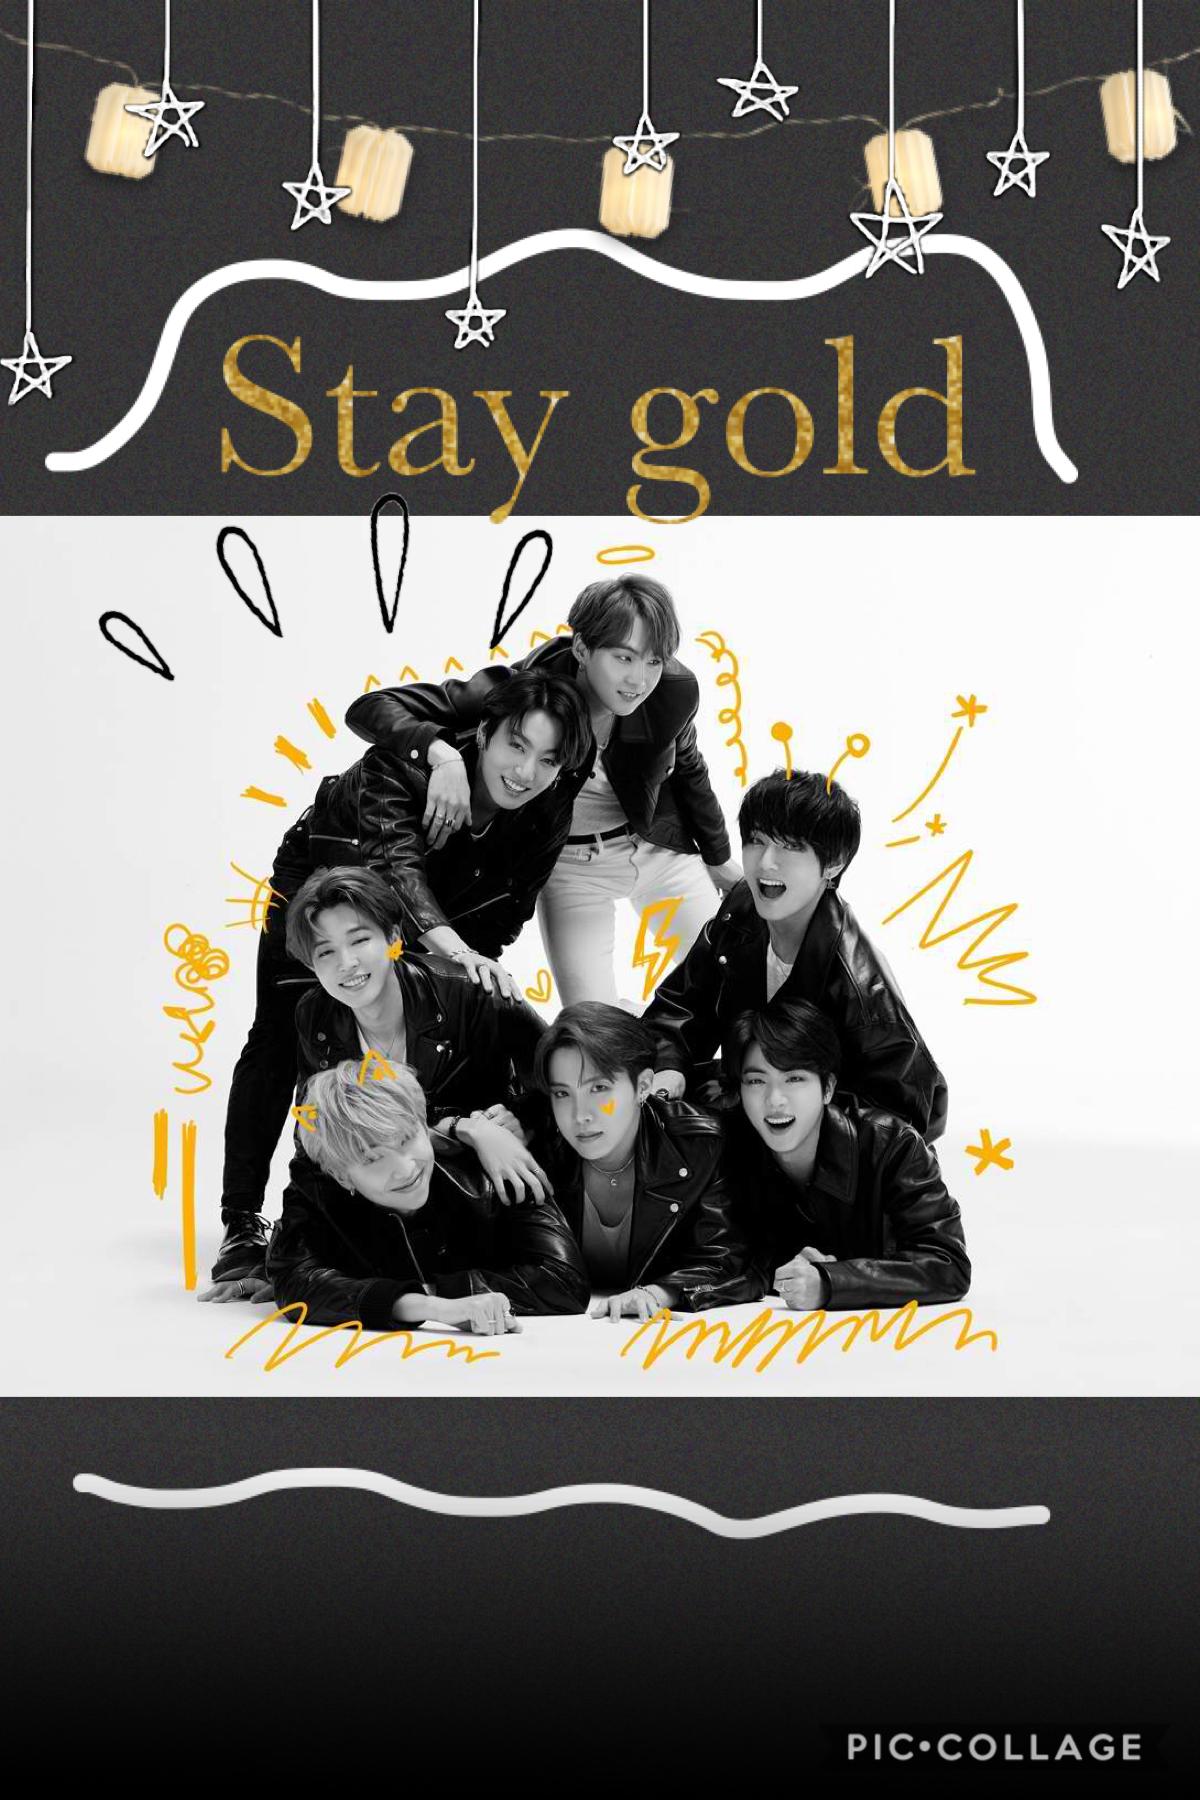 StAy gOLd!!!! Guys stream stay gold on YouTube. This was such bop! Lemme know if u guys likes this! I really did!! ⭐️⭐️⭐️⭐️⭐️⭐️⭐️⭐️⭐️⭐️⭐️💫💫💫💫💫💫